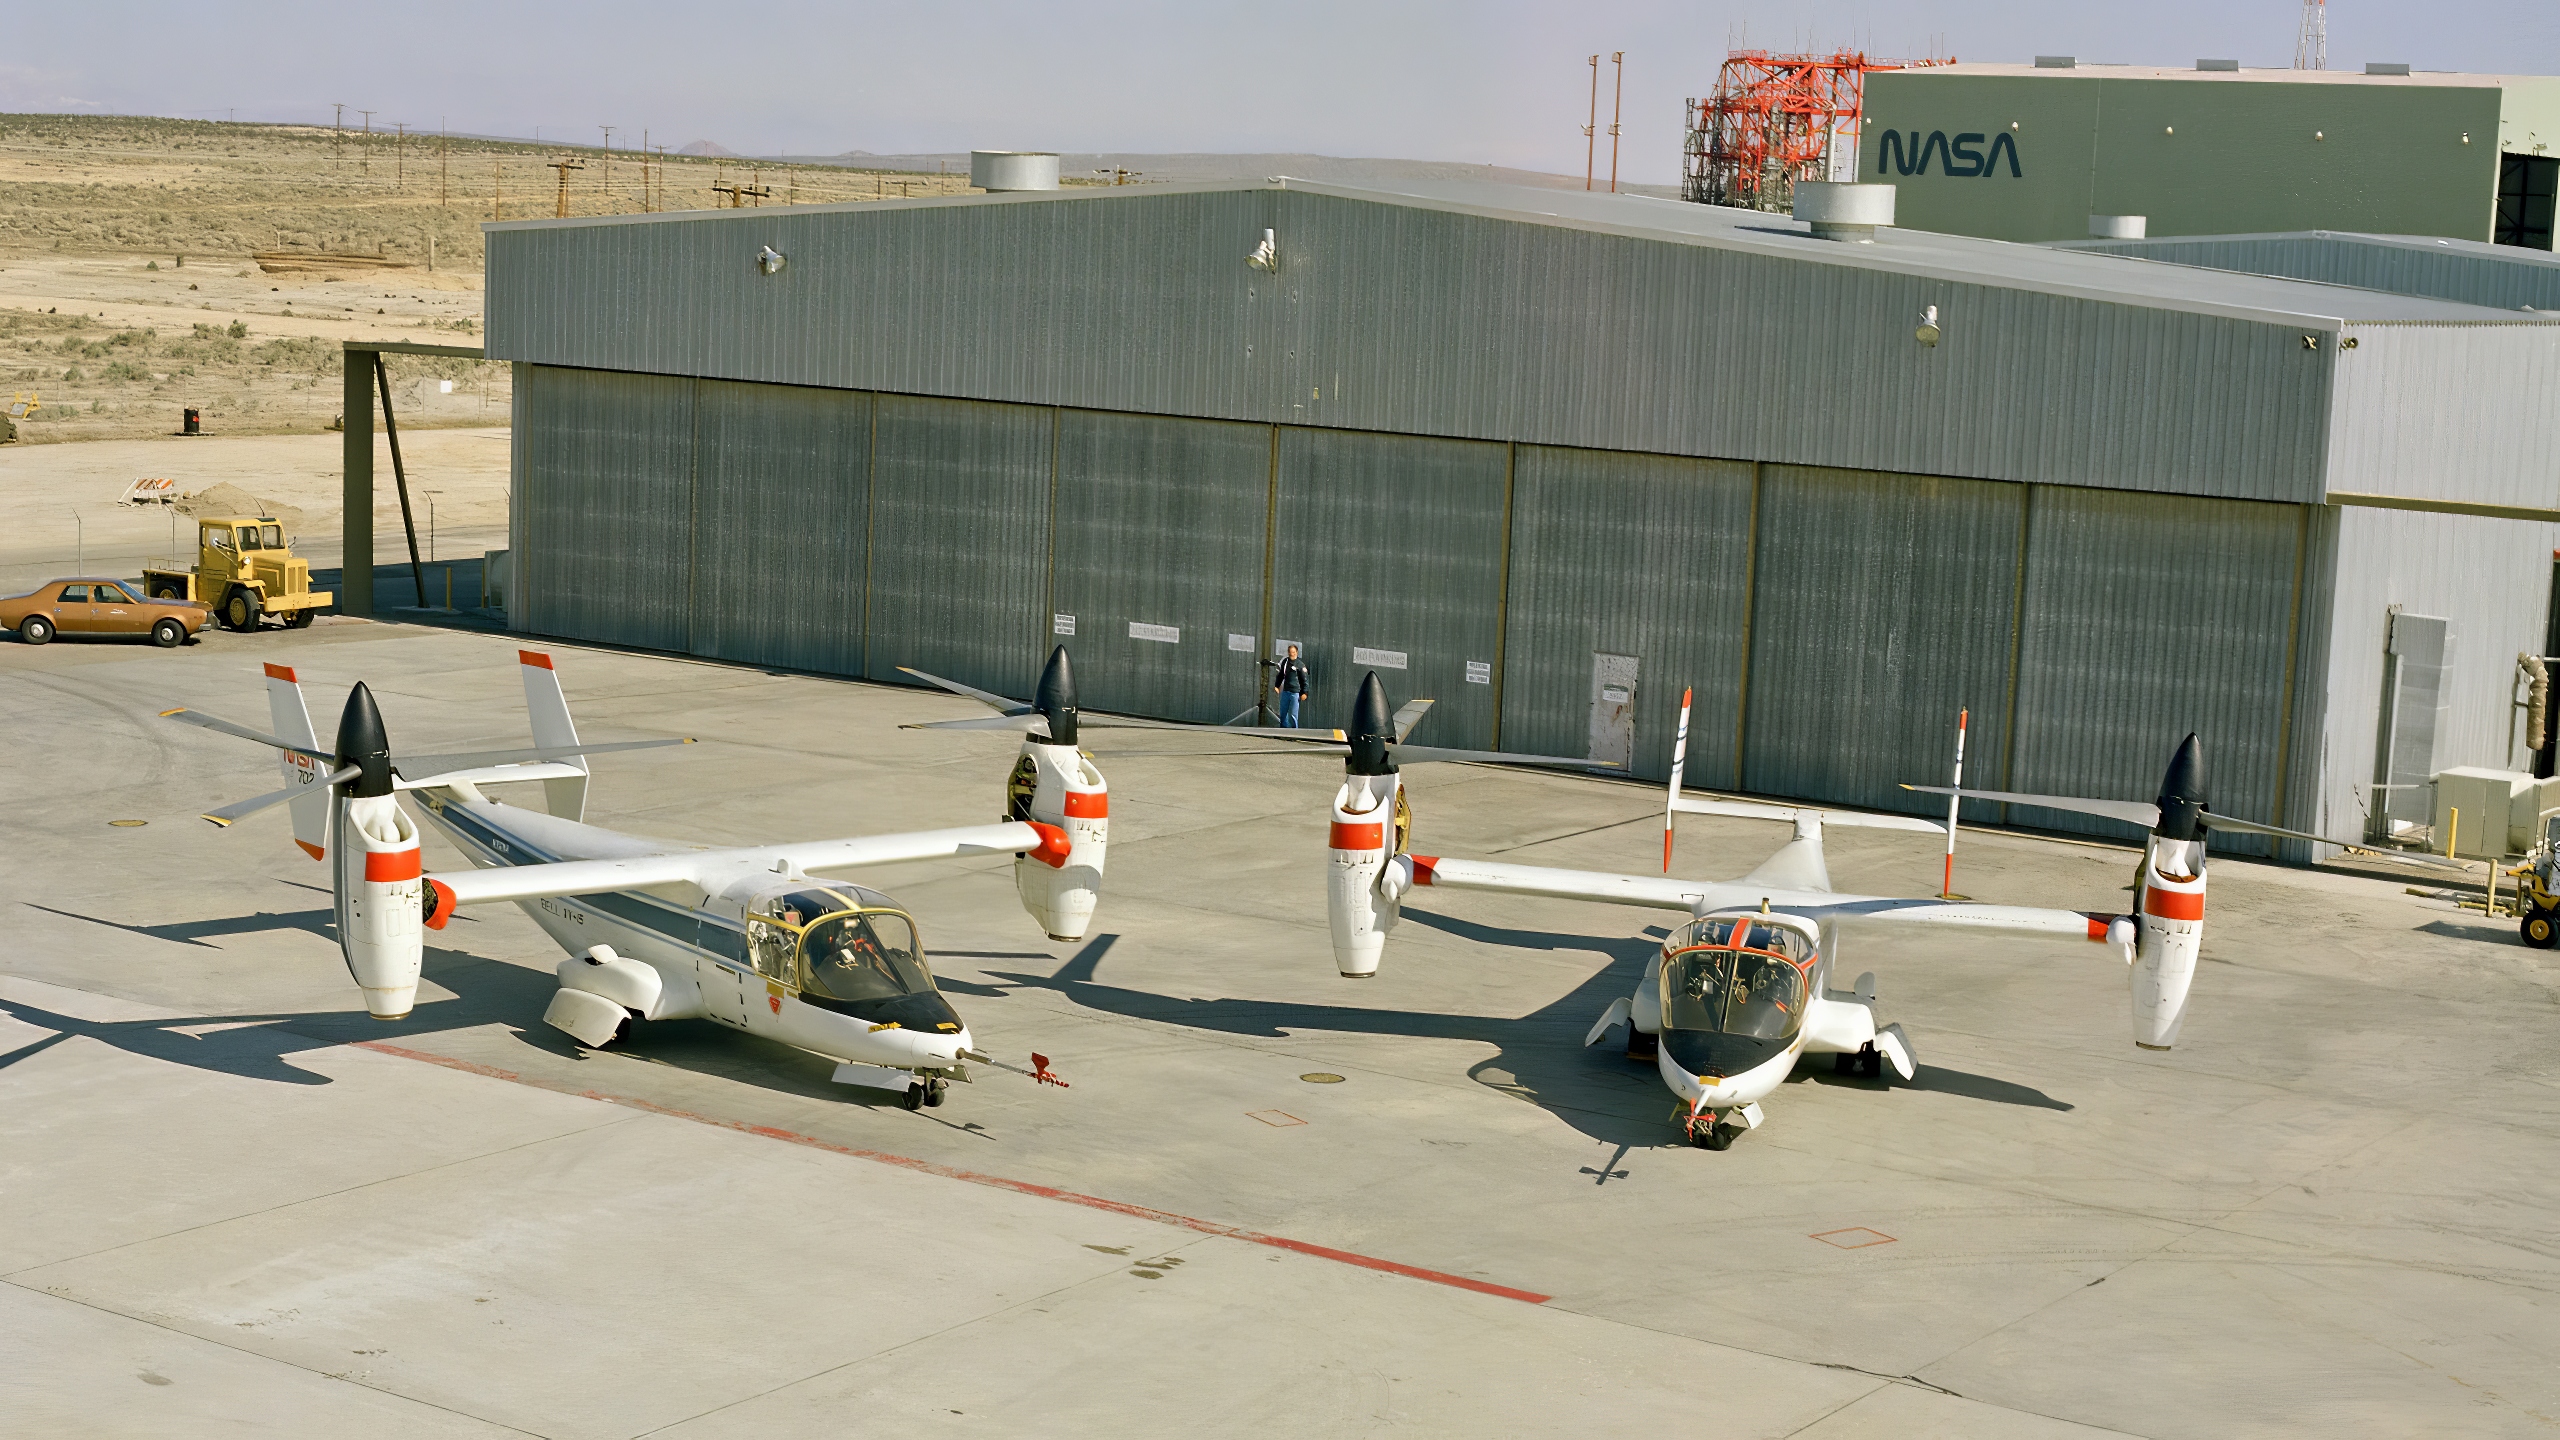 The XV-15 tilt rotor ships #1 and #2 parked on the NASA Dryden Flight Research Center ramp